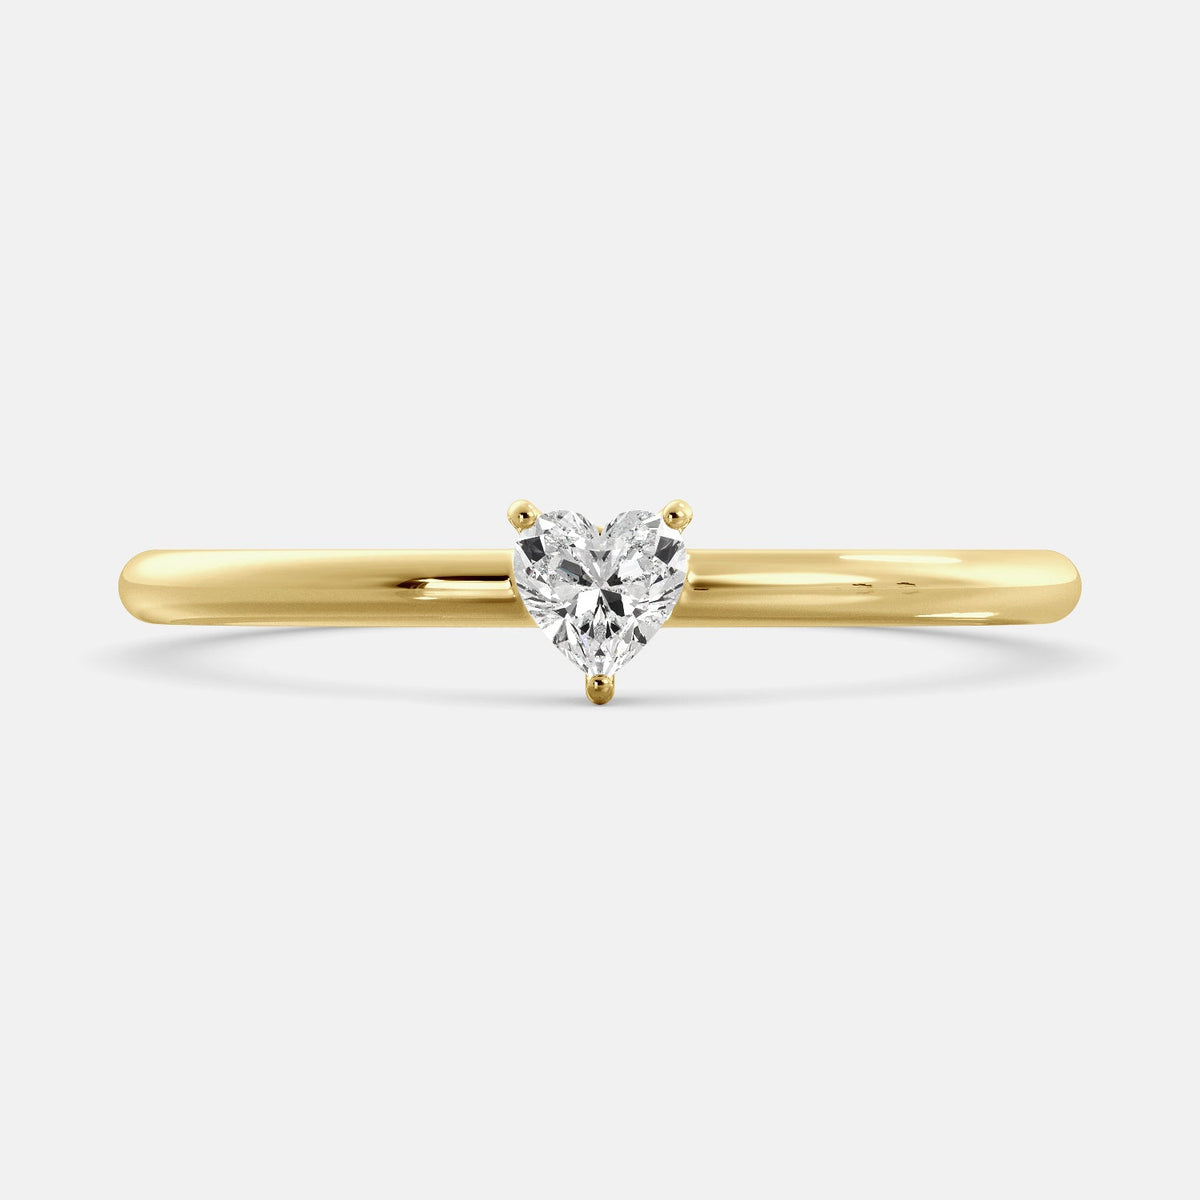 A close-up of a heart-shaped solitaire diamond ring in recycled yellow gold. The ring is set with a single, large diamond in the center of a heart-shaped setting. The ring is made of recycled yellow gold and has a simple, elegant design. The diamond is sparkling and reflects light beautifully. The ring is a perfect gift for a loved one or a special occasion.